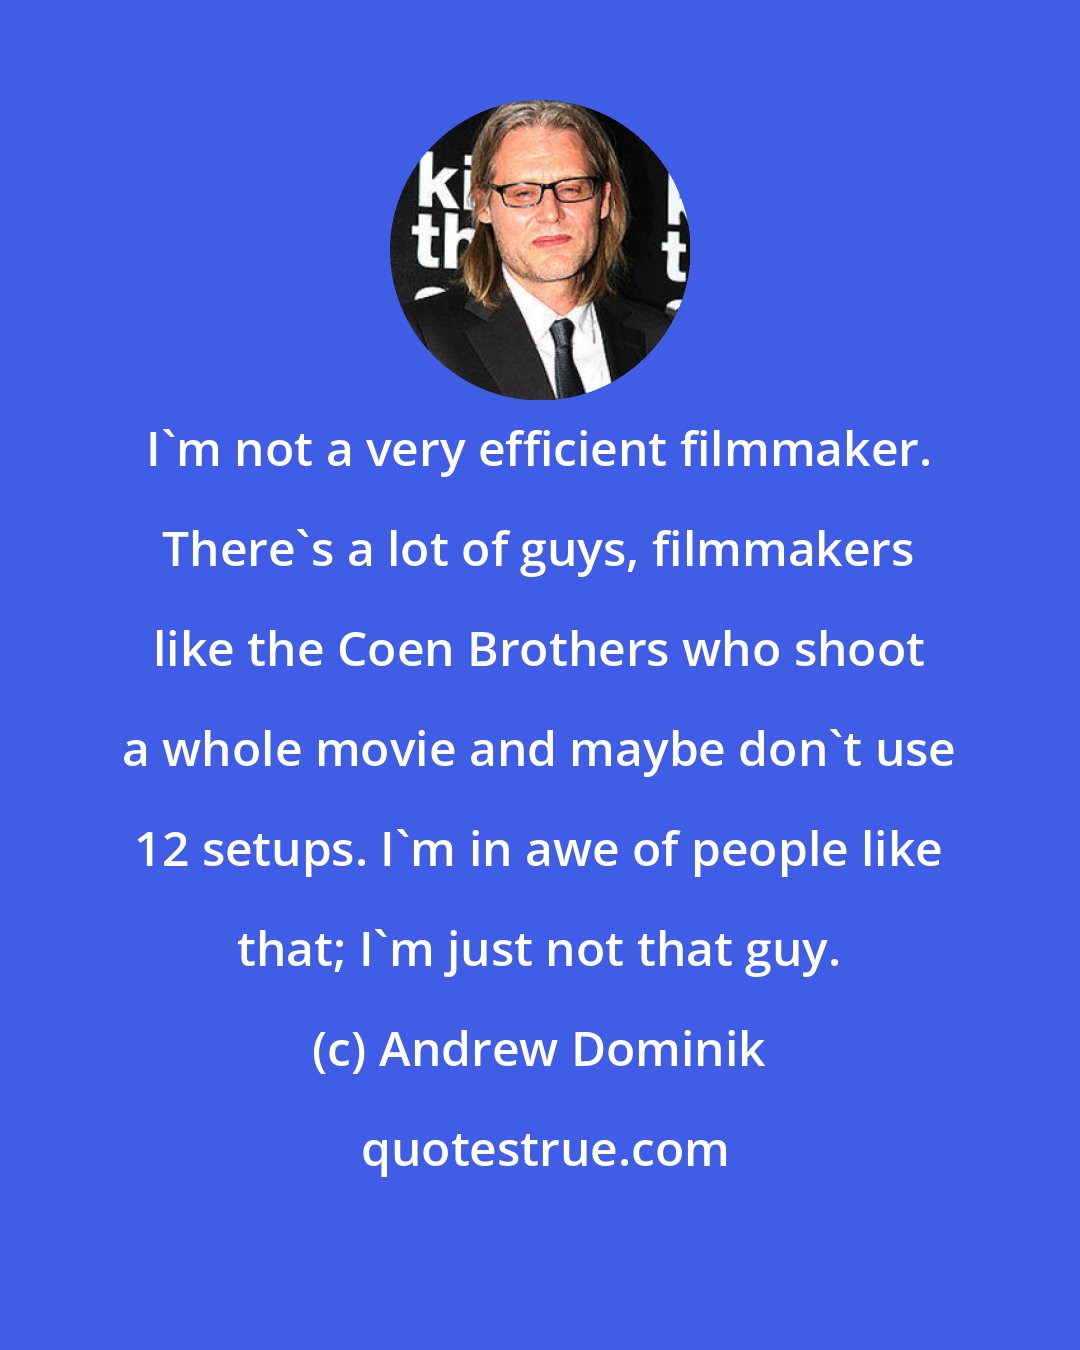 Andrew Dominik: I'm not a very efficient filmmaker. There's a lot of guys, filmmakers like the Coen Brothers who shoot a whole movie and maybe don't use 12 setups. I'm in awe of people like that; I'm just not that guy.